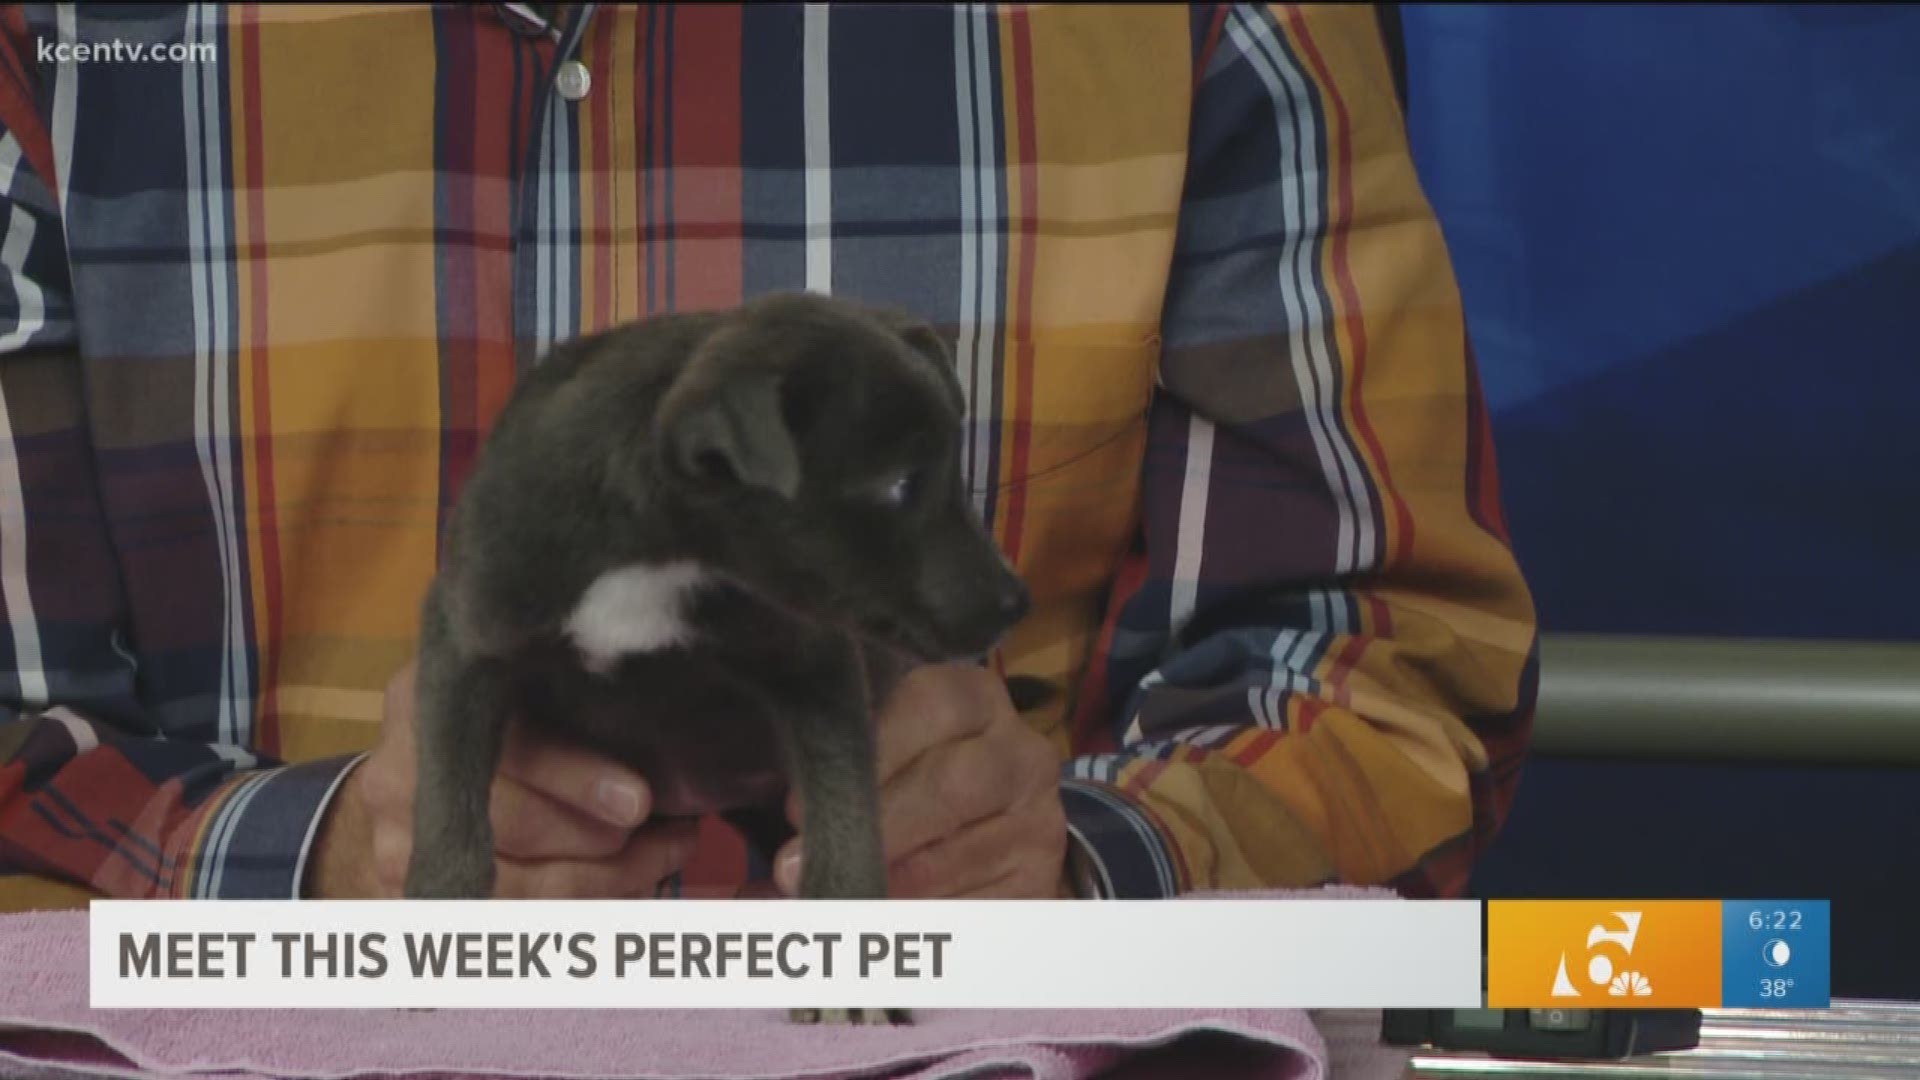 Meet this week's perfect pet. You can adopt them from the Humane Society of Central Texas.